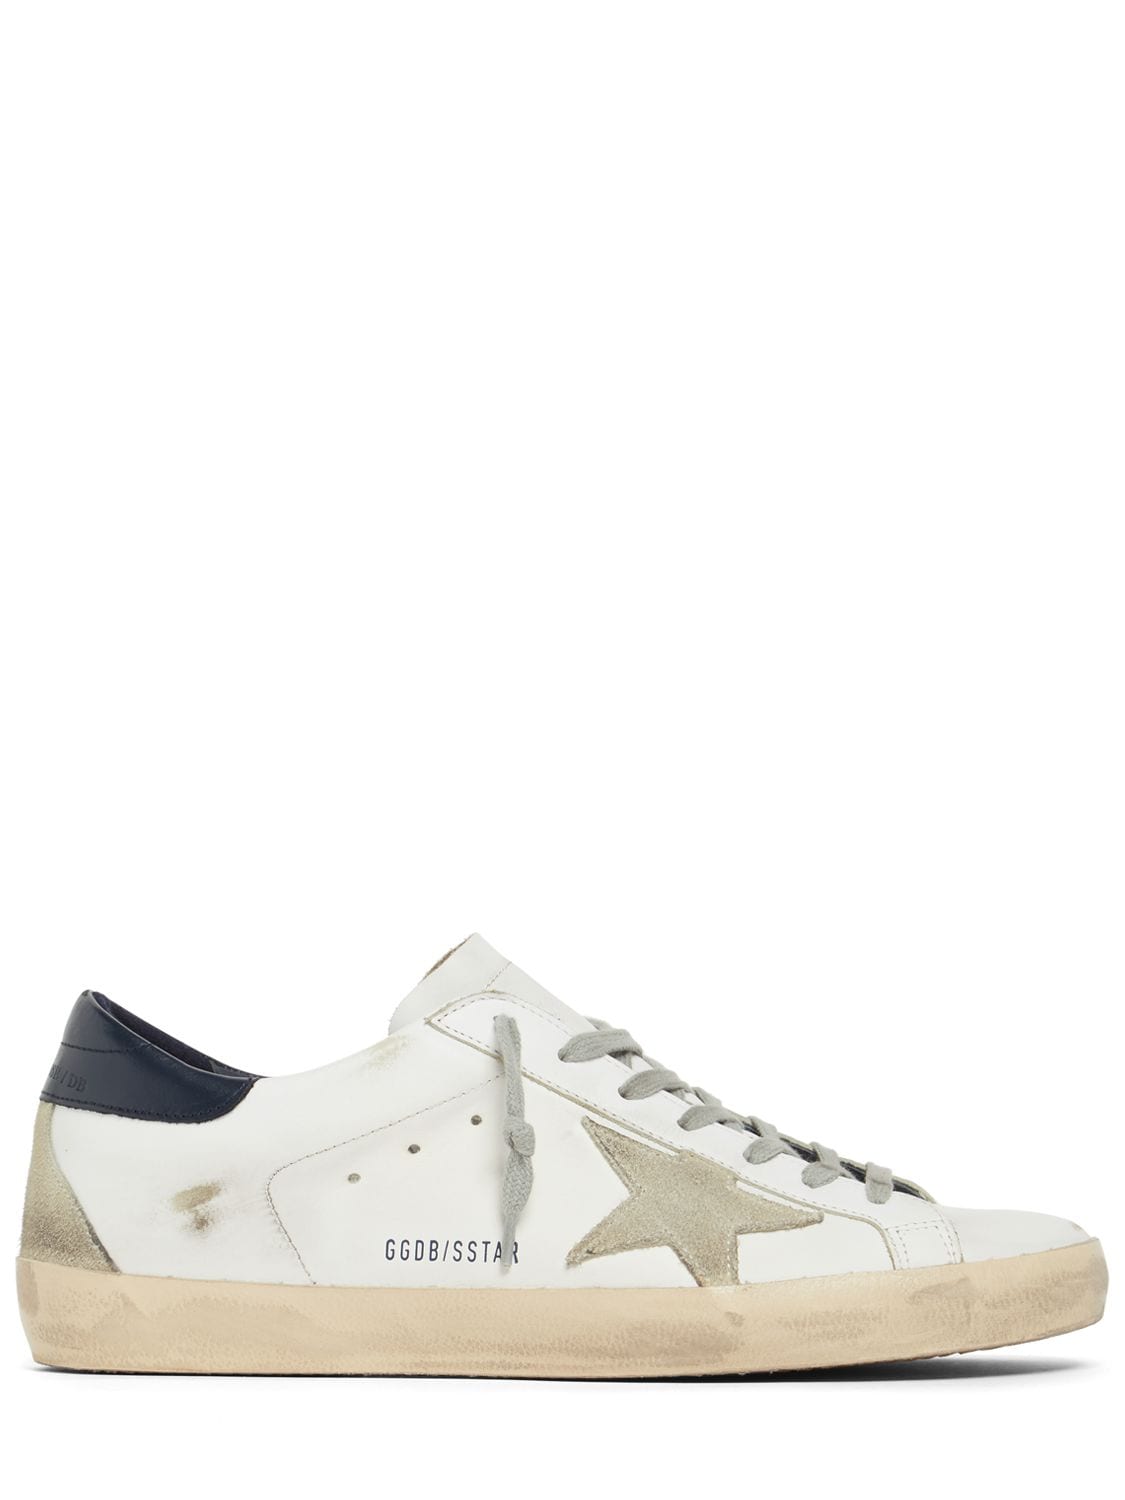 Shop Golden Goose 20mm Super Star Leather & Suede Sneakers In White,ice,blue